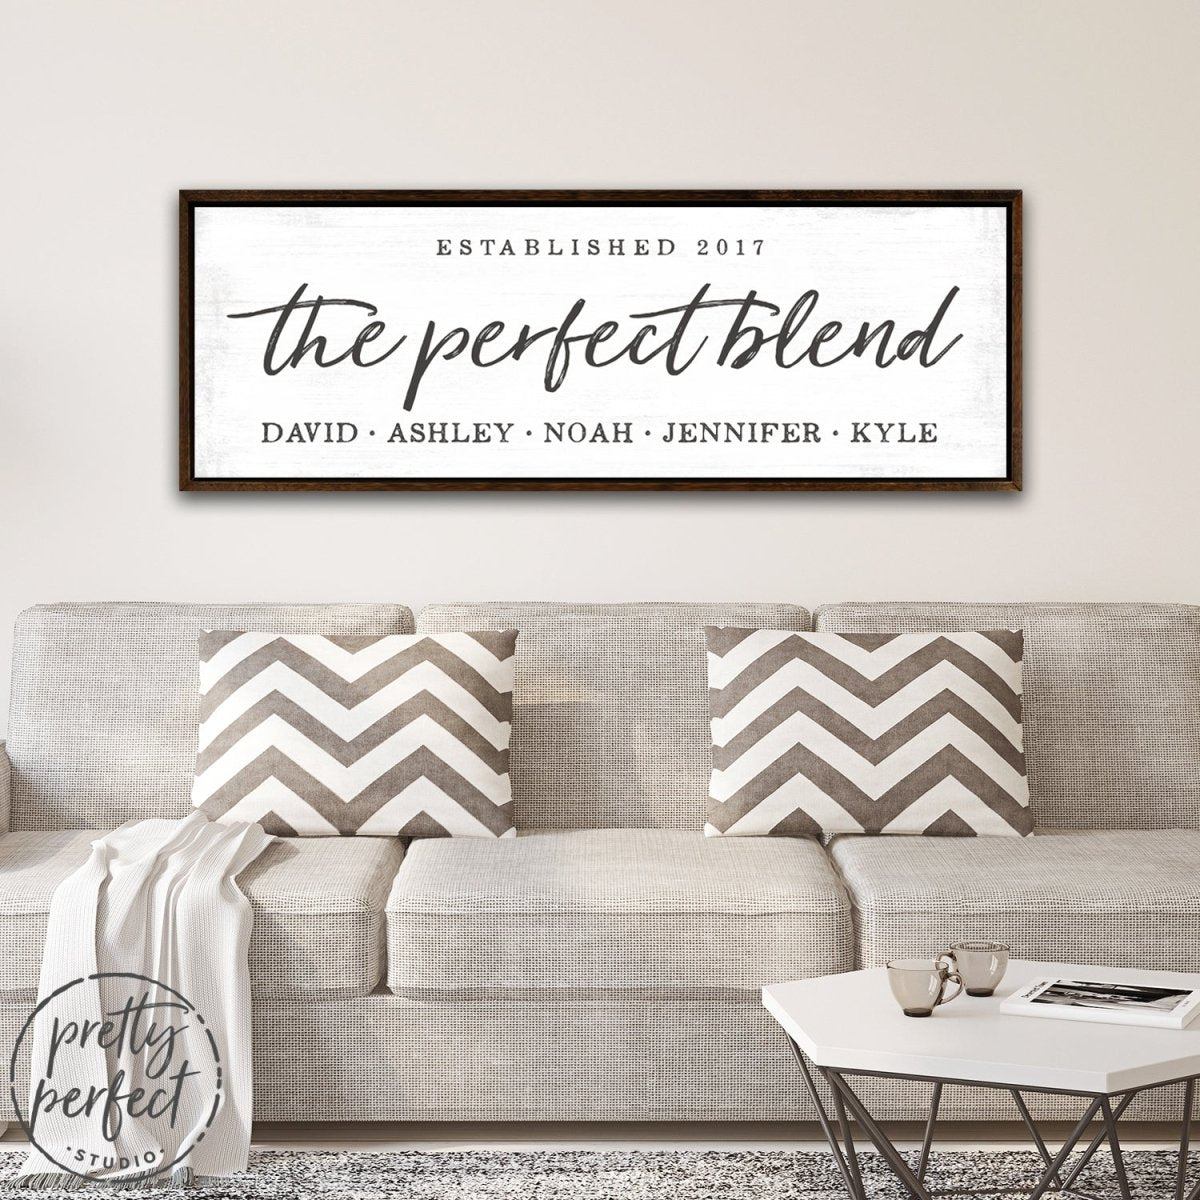 The Perfect Blend Personalized Family Name Sign Above Couch - Pretty Perfect Studio